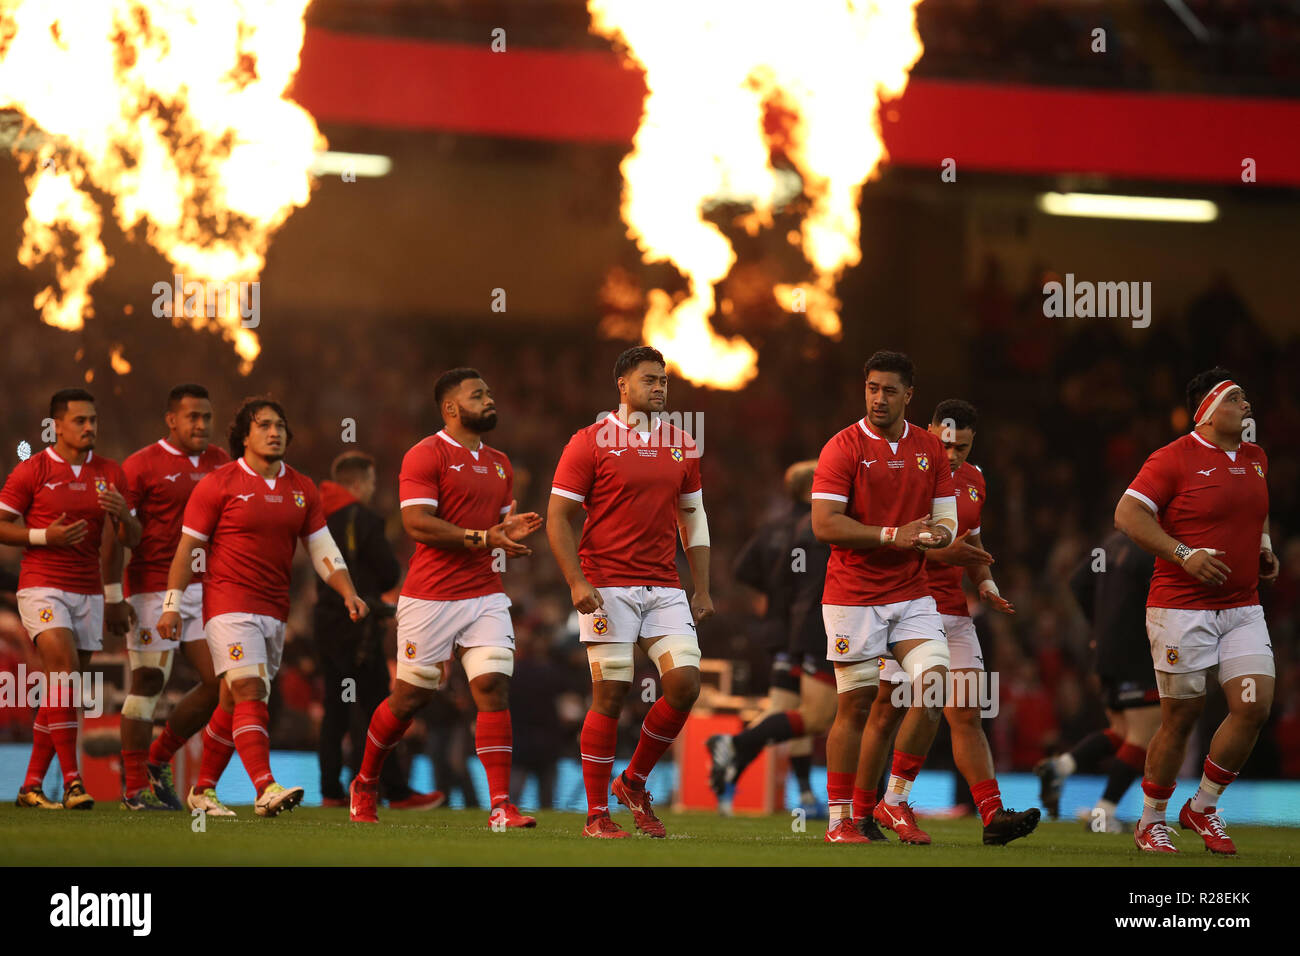 Cardiff, Wales, UK. 17th Nov, 2018. Tonga rugby players walk out onto the  pitch ahead of k/o.Wales v Tonga , Under Armour series Autumn international  rugby match at the Principality Stadium in